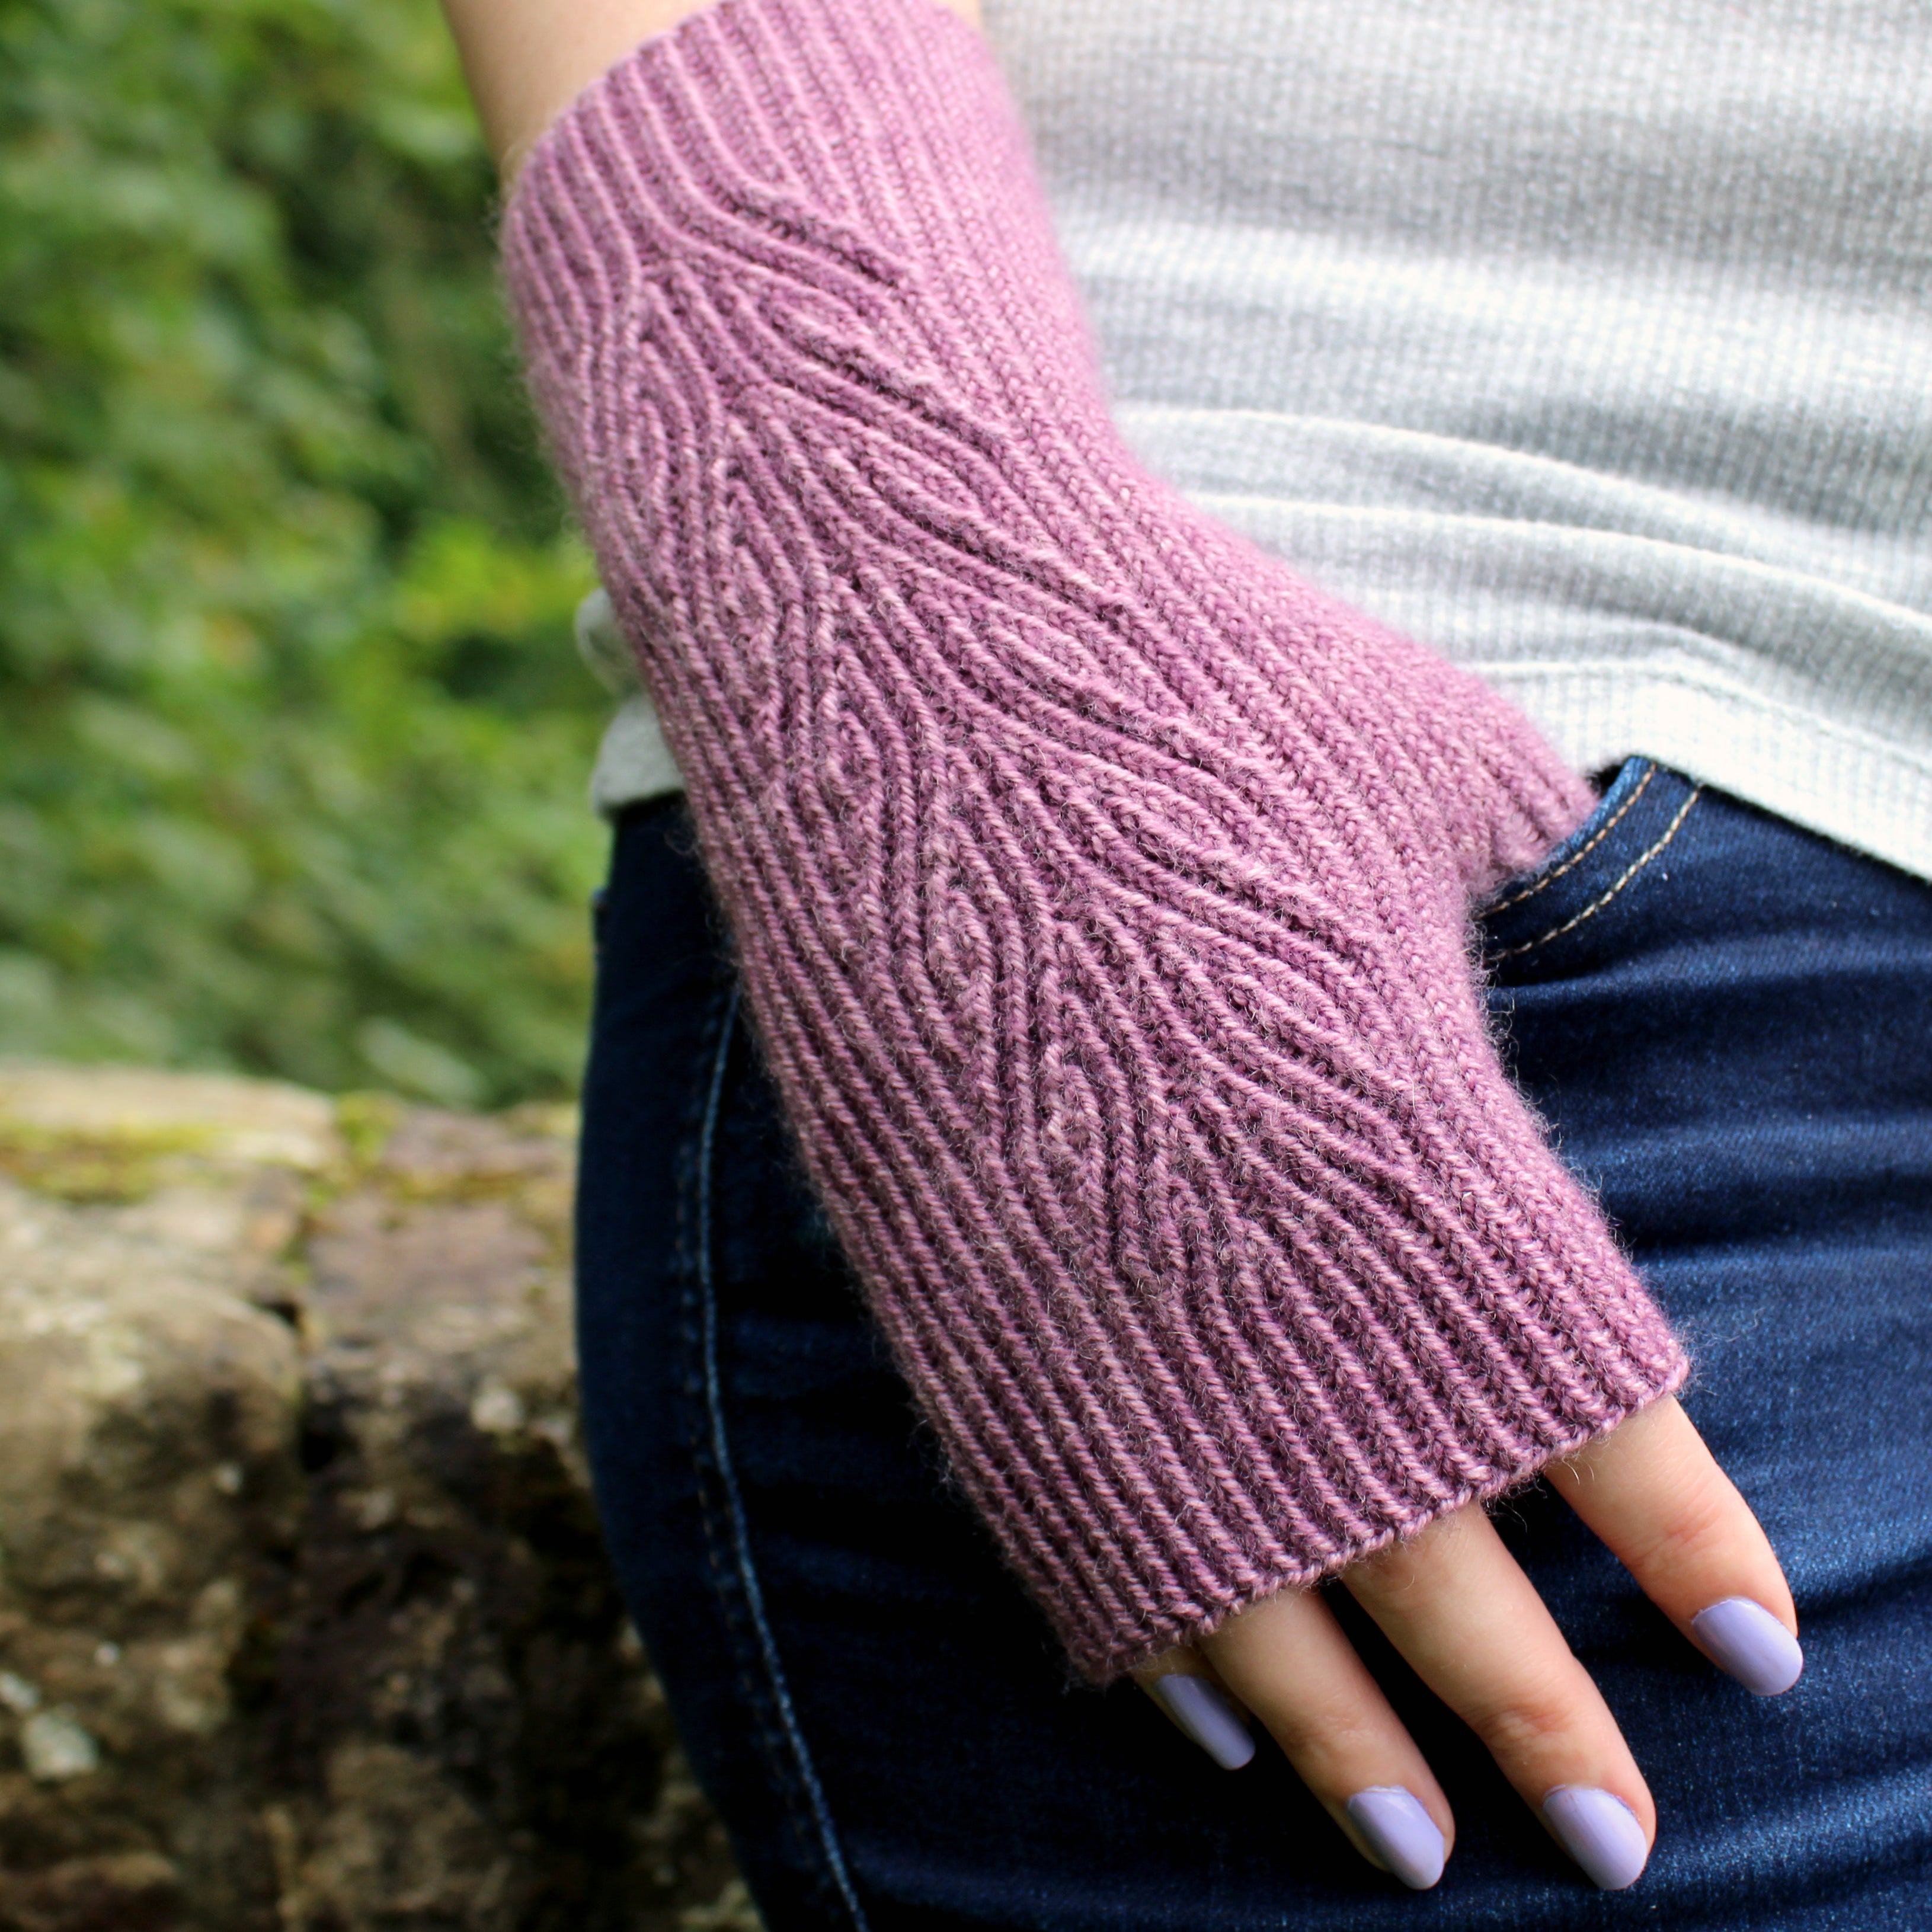 Lus Na Tuise mitts by Liz Corke